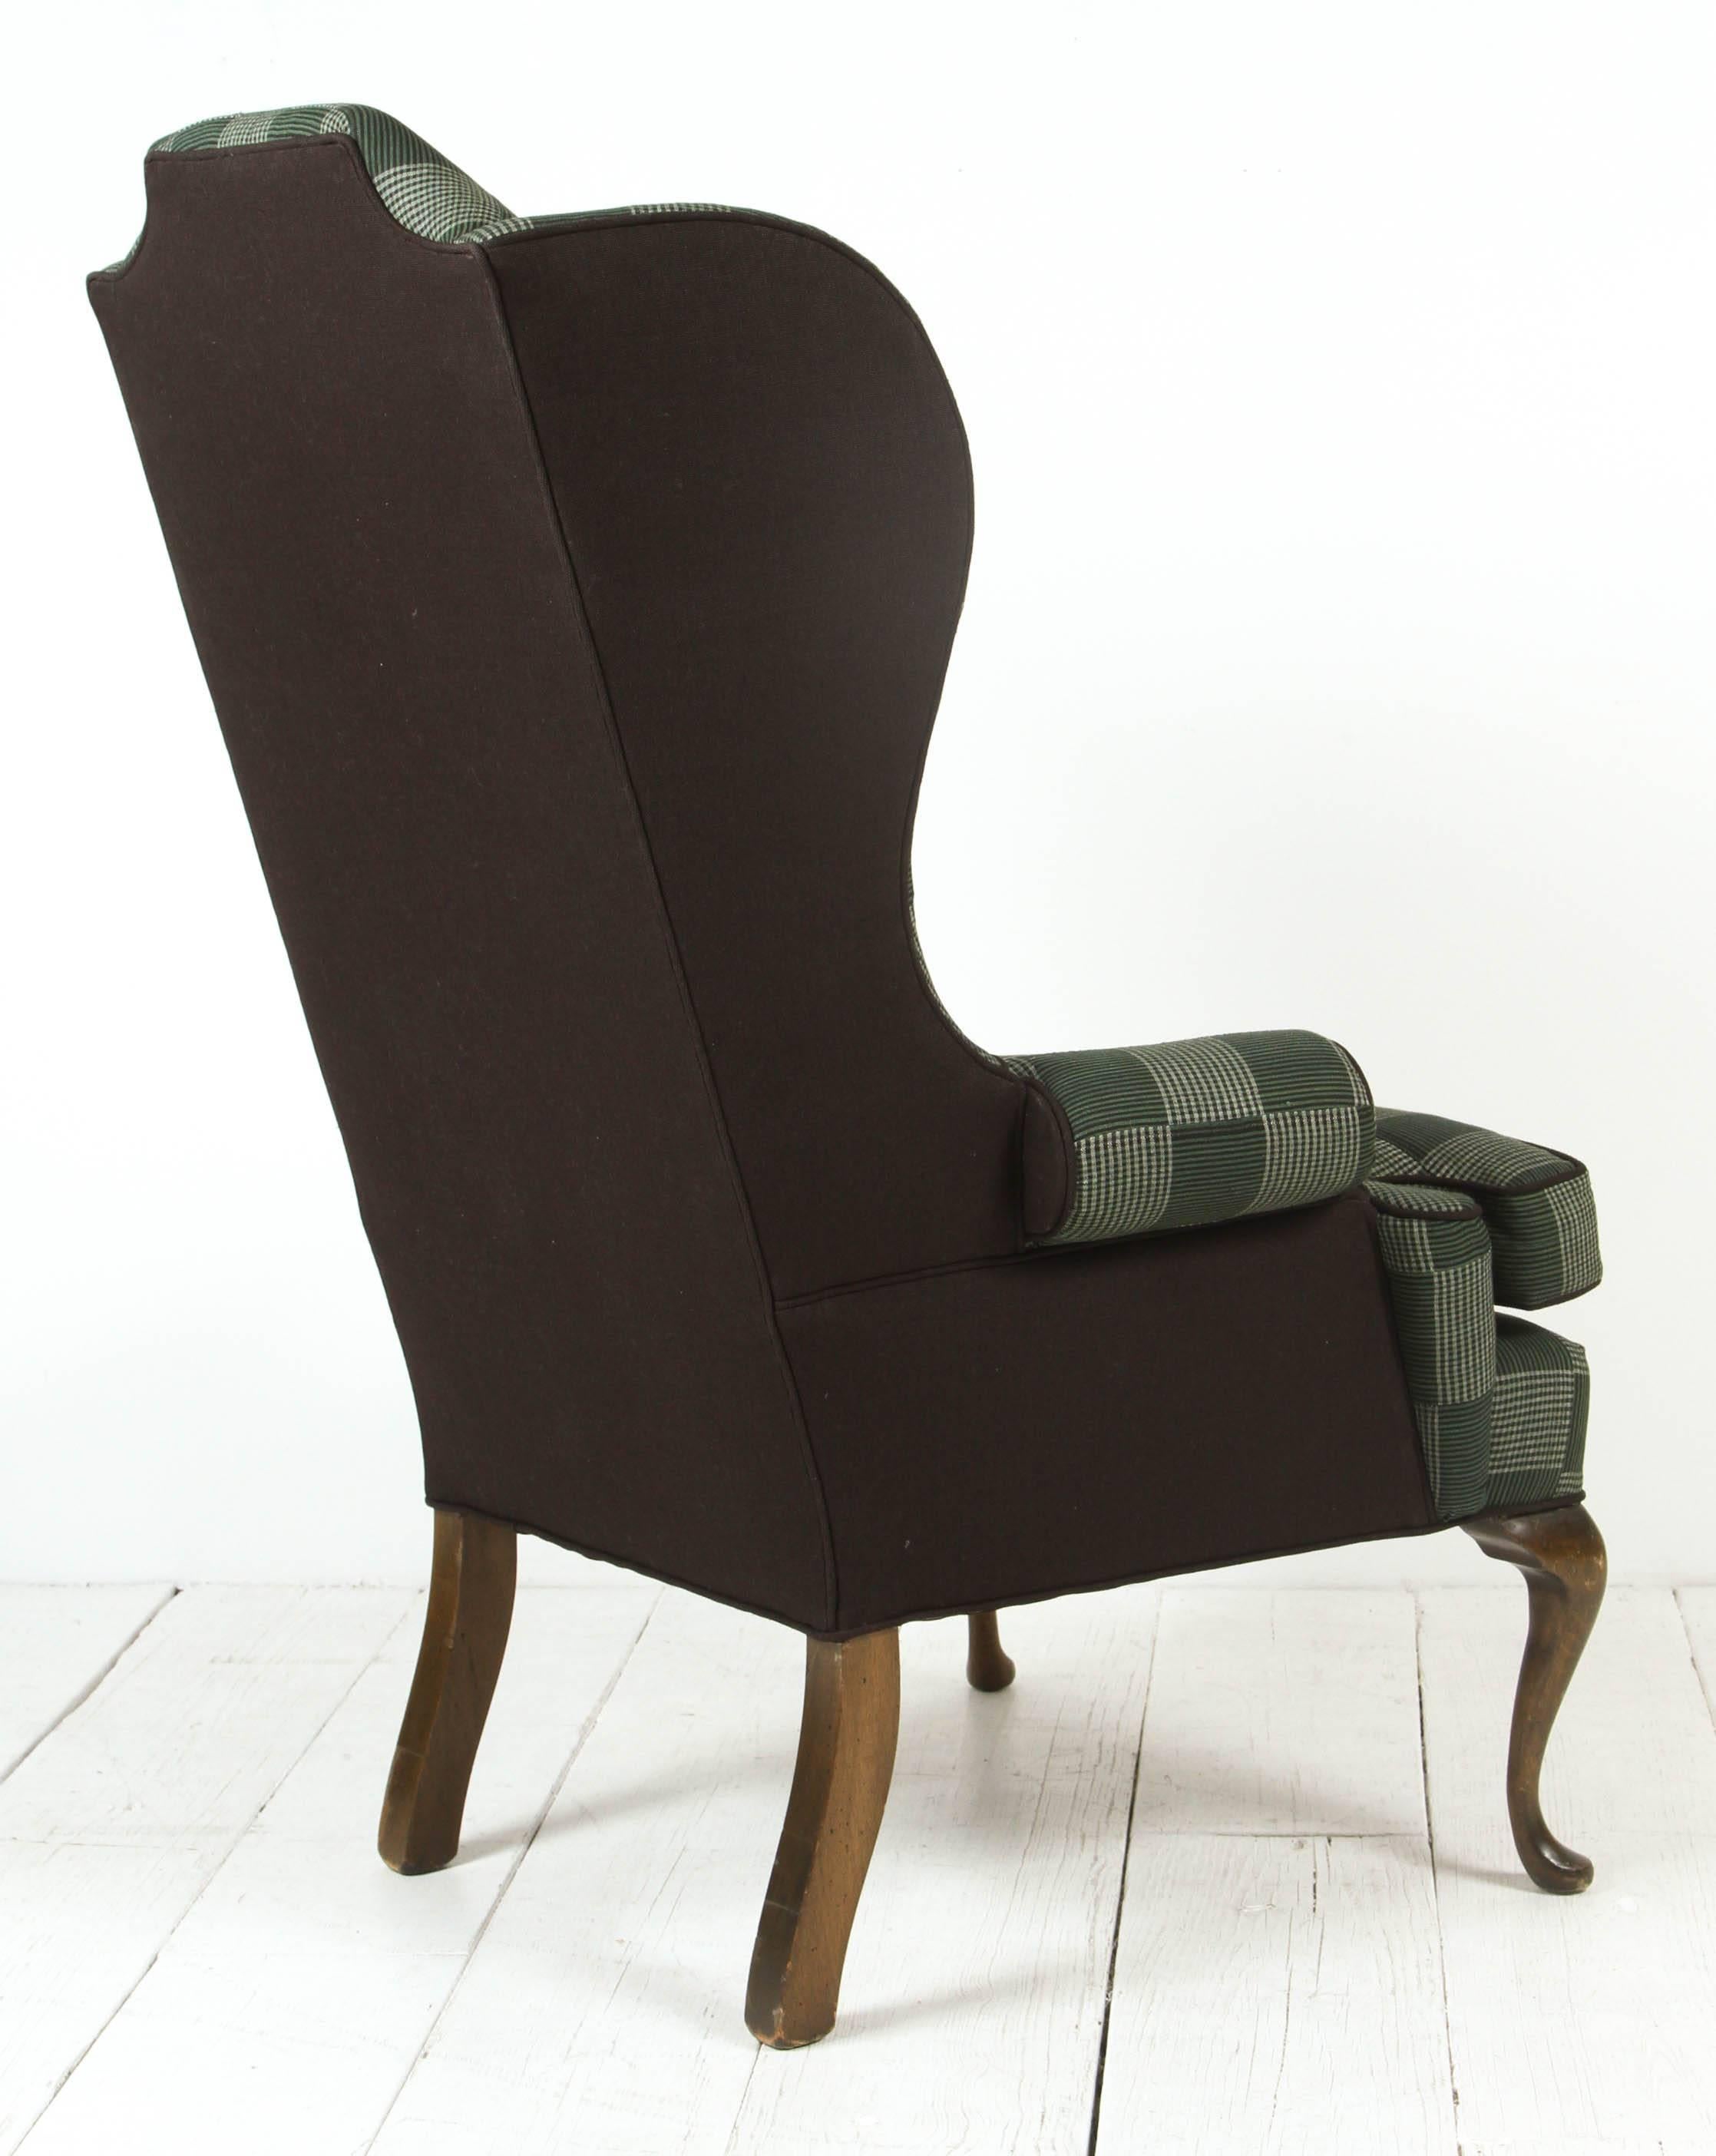 American Classical Classical Wing Chair Reupholstered in Green Plaid African Fabric